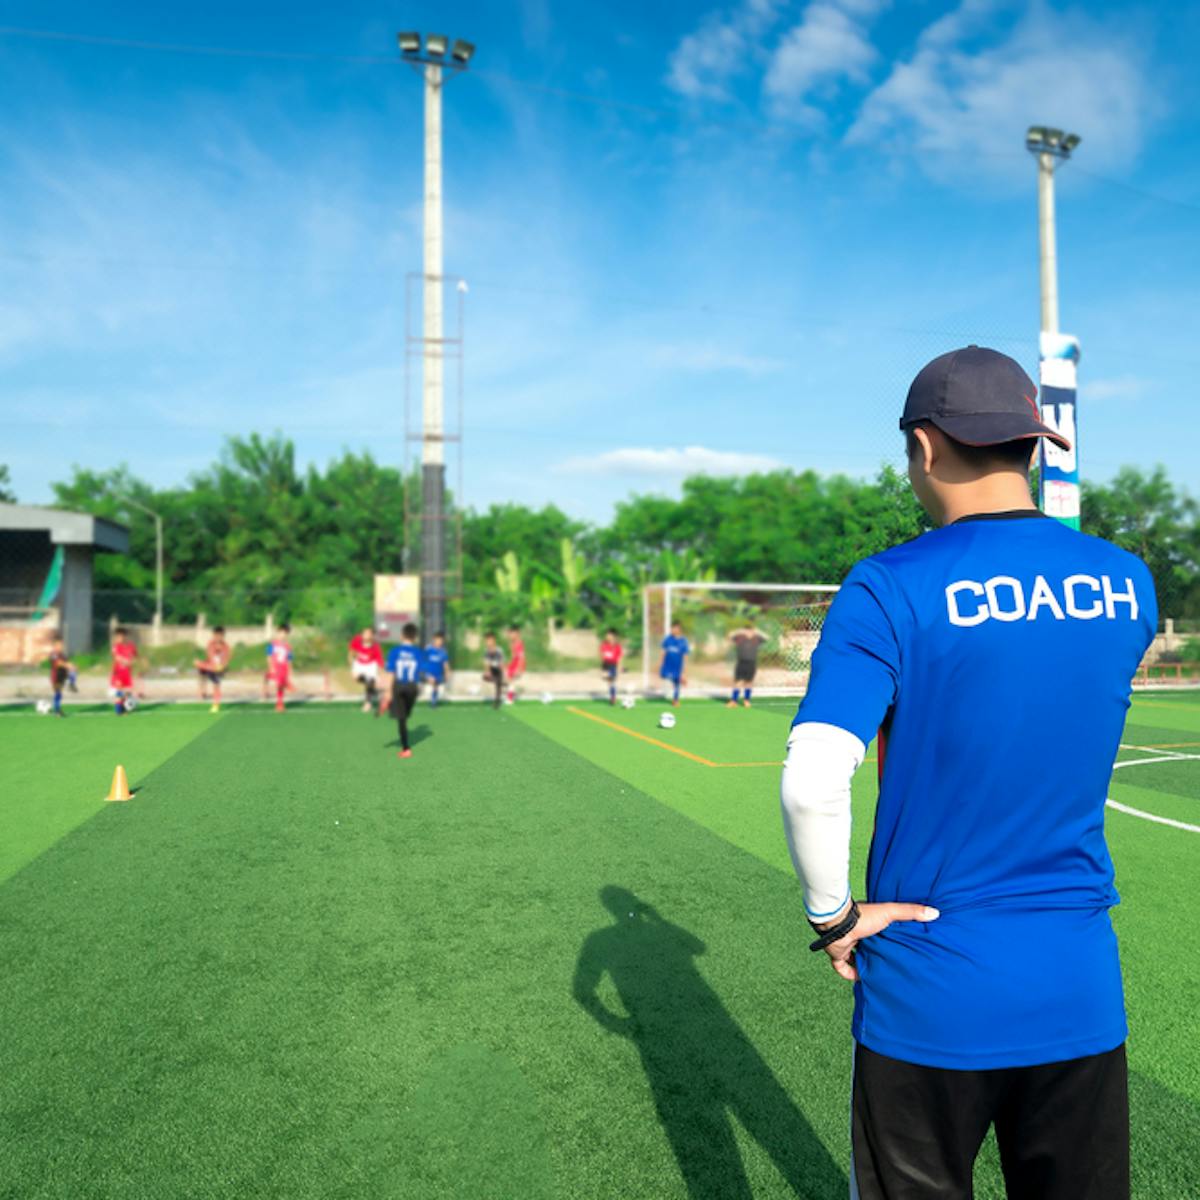 Five unscientific methods some sports coaches use